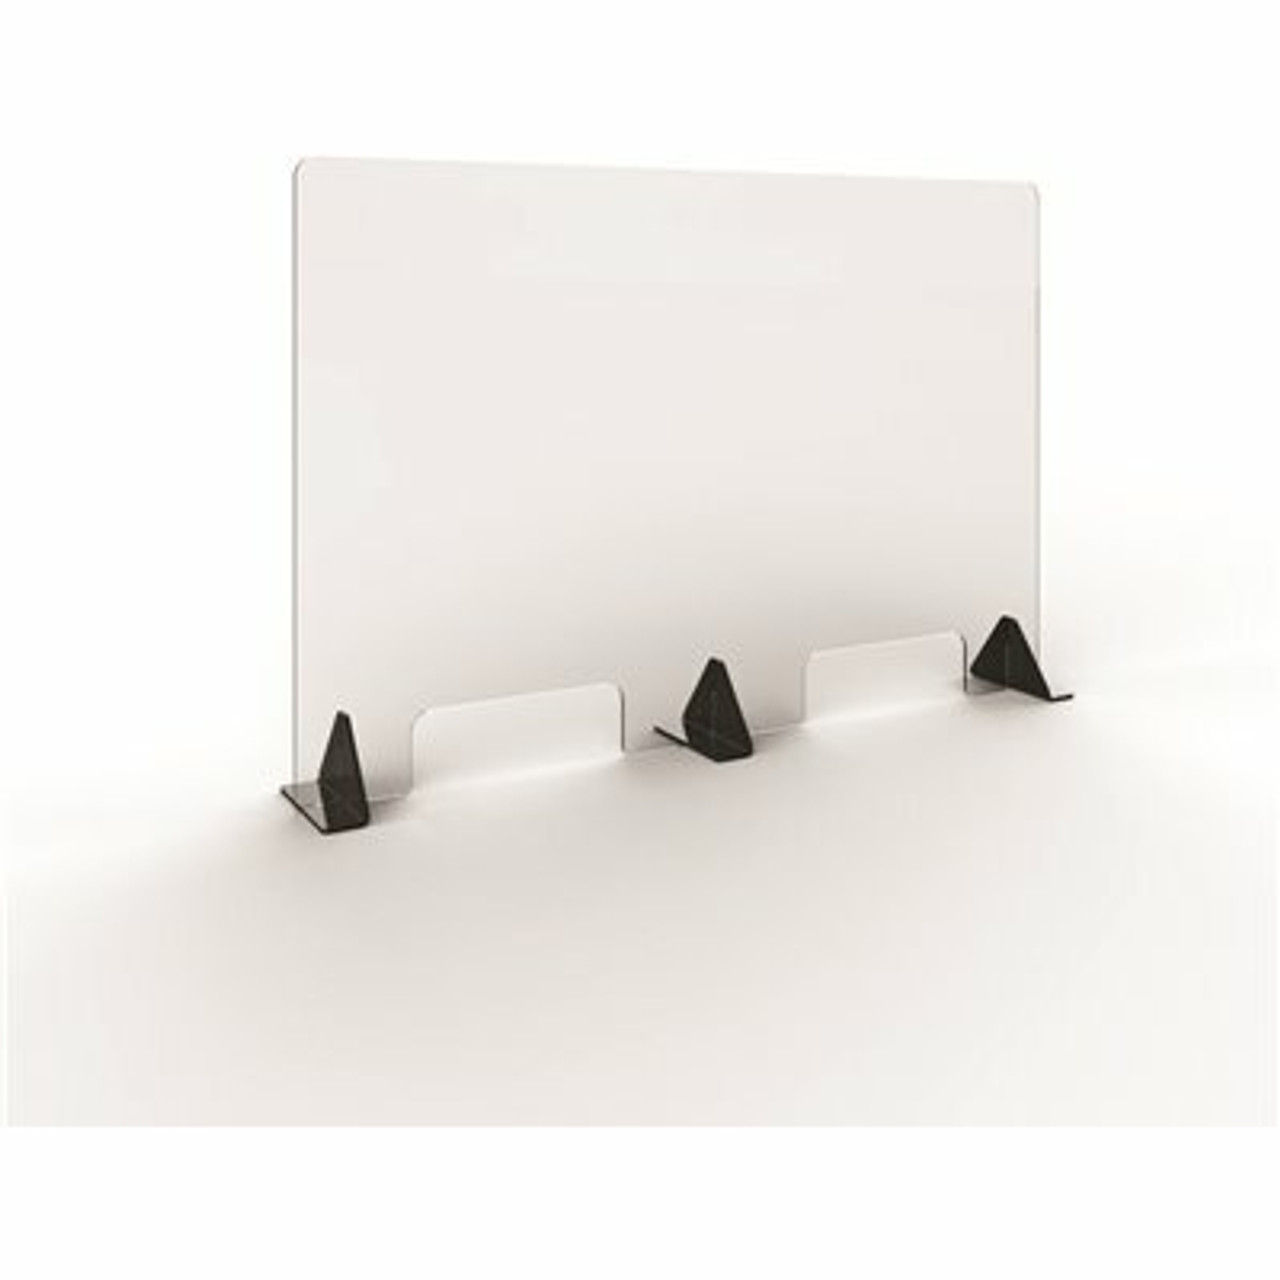 47.5 In. X 31.5 In. X 0.187 In. Acrylic Sheet With 2-12 In. X 4 In. Passthroughs (3-Pack)